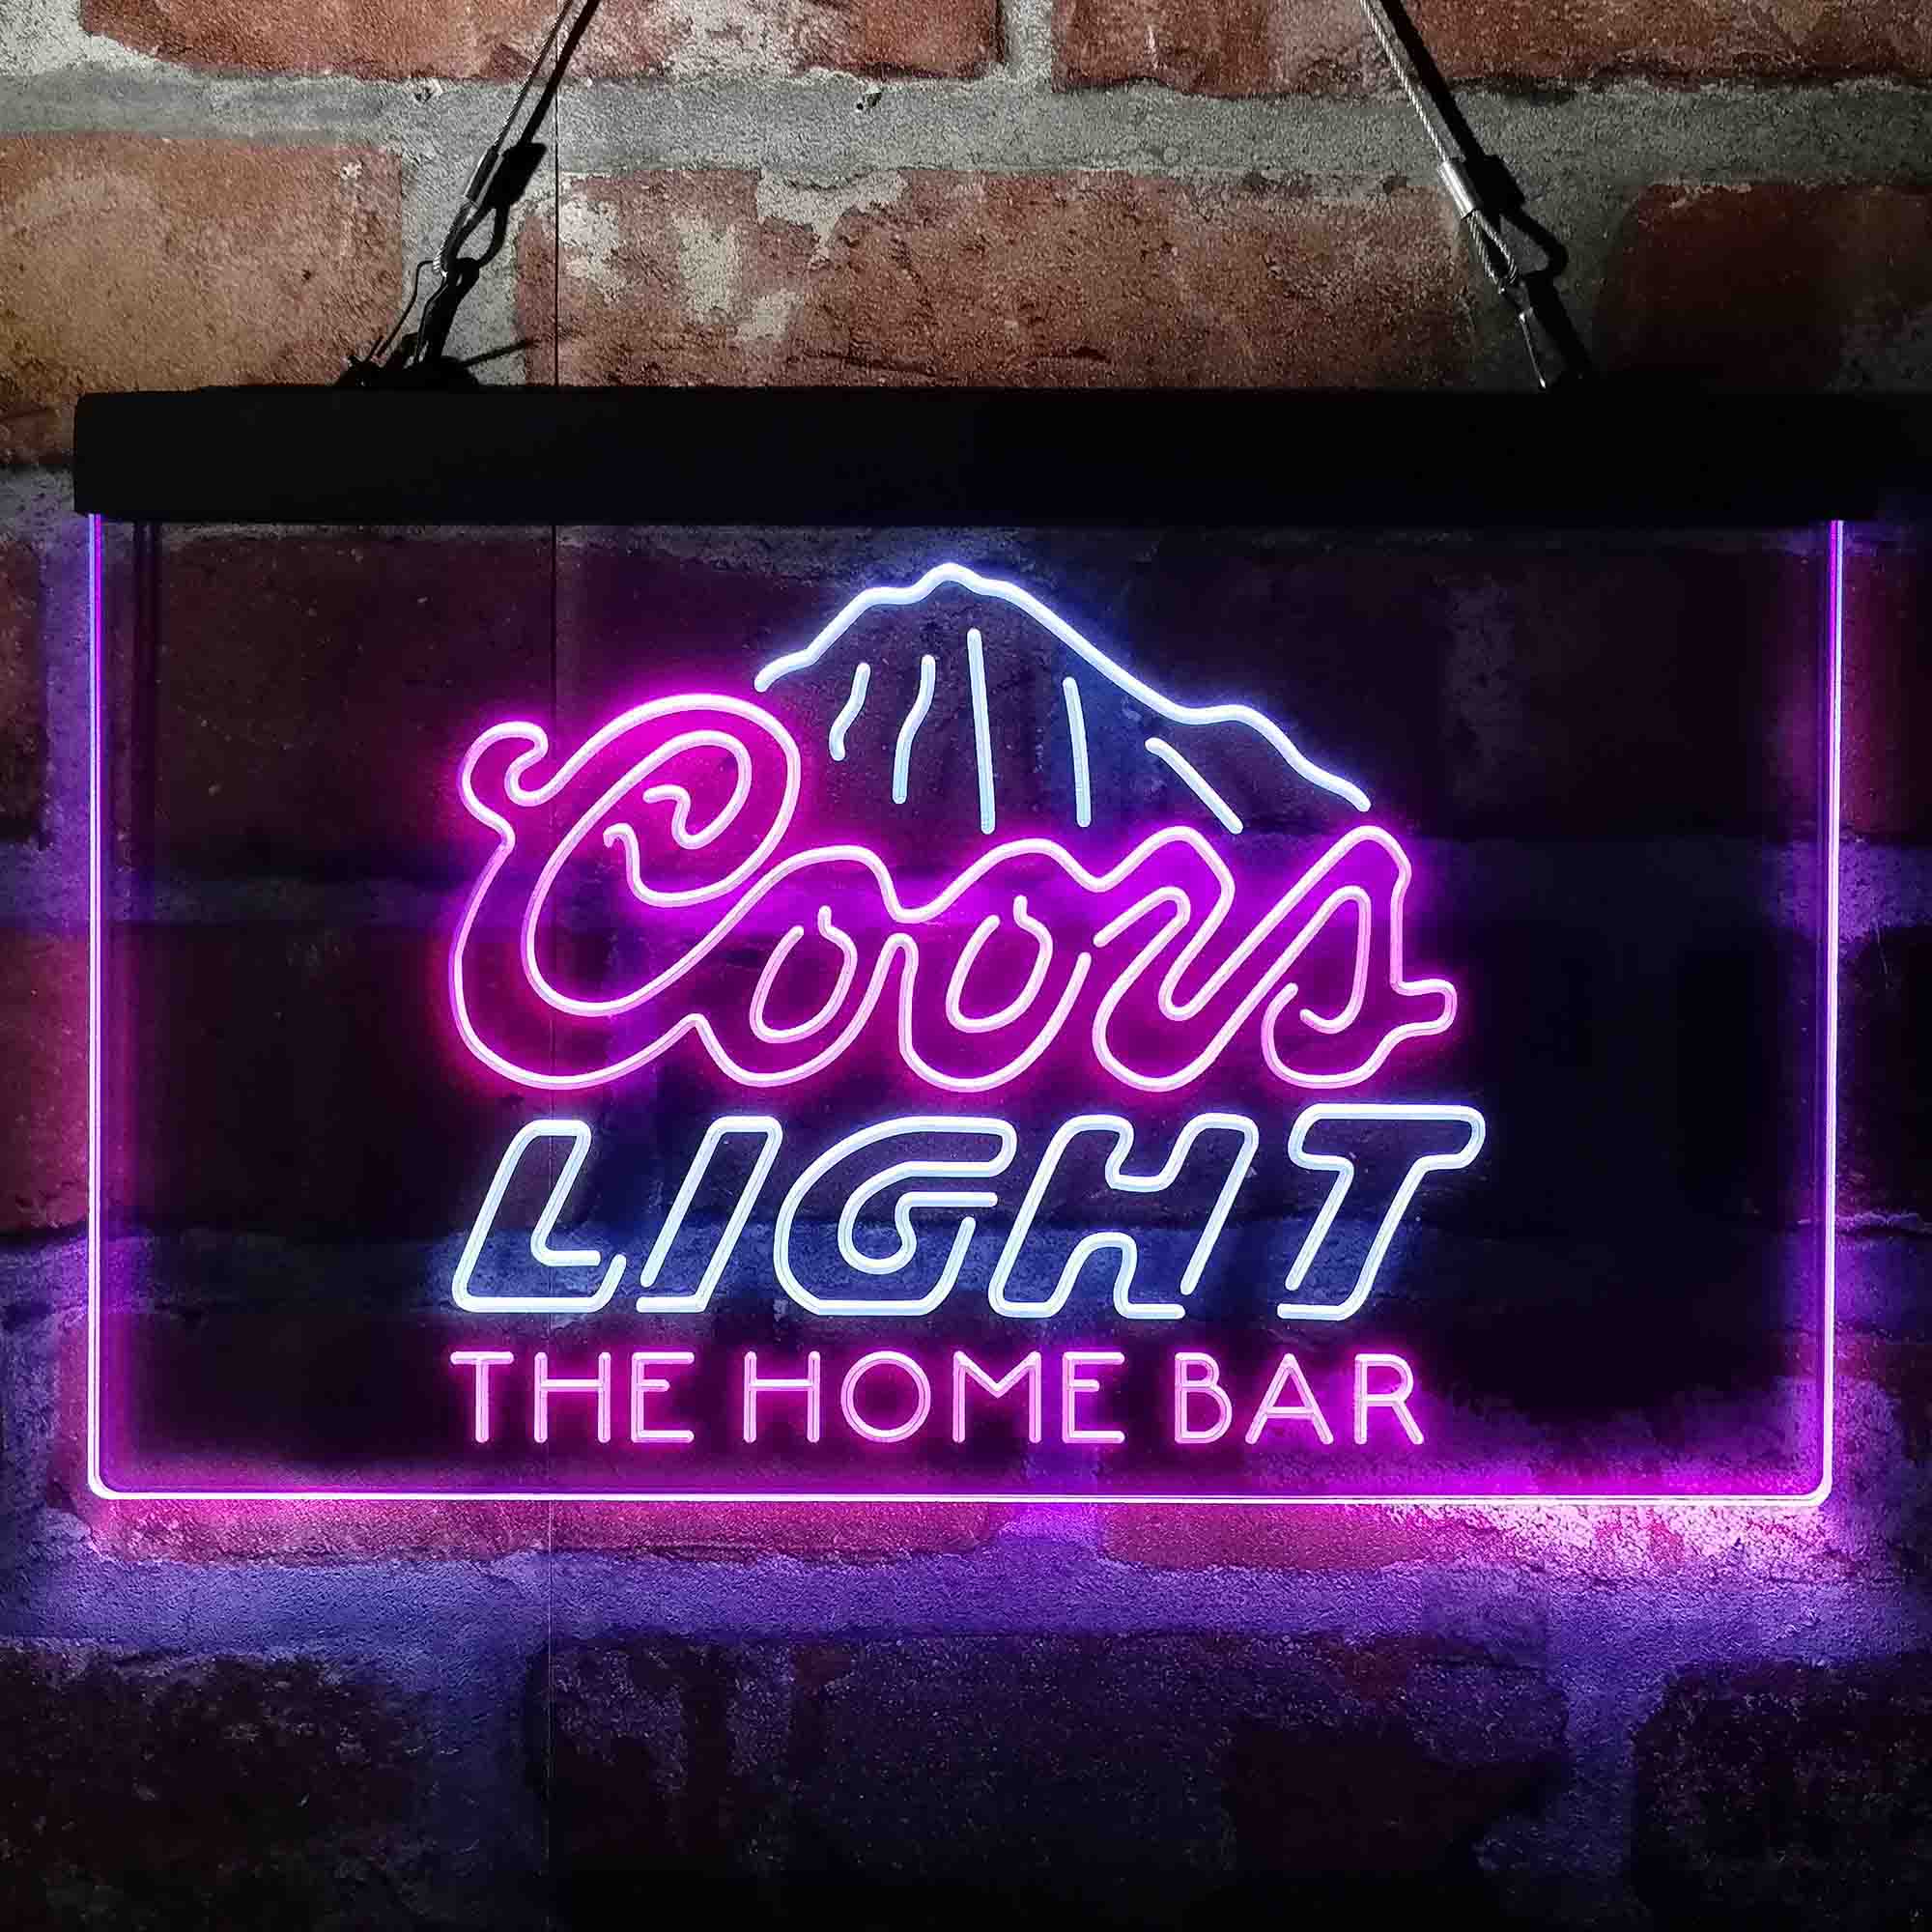 Personalized Coors Light Mountain Home Bar Neon LED Sign